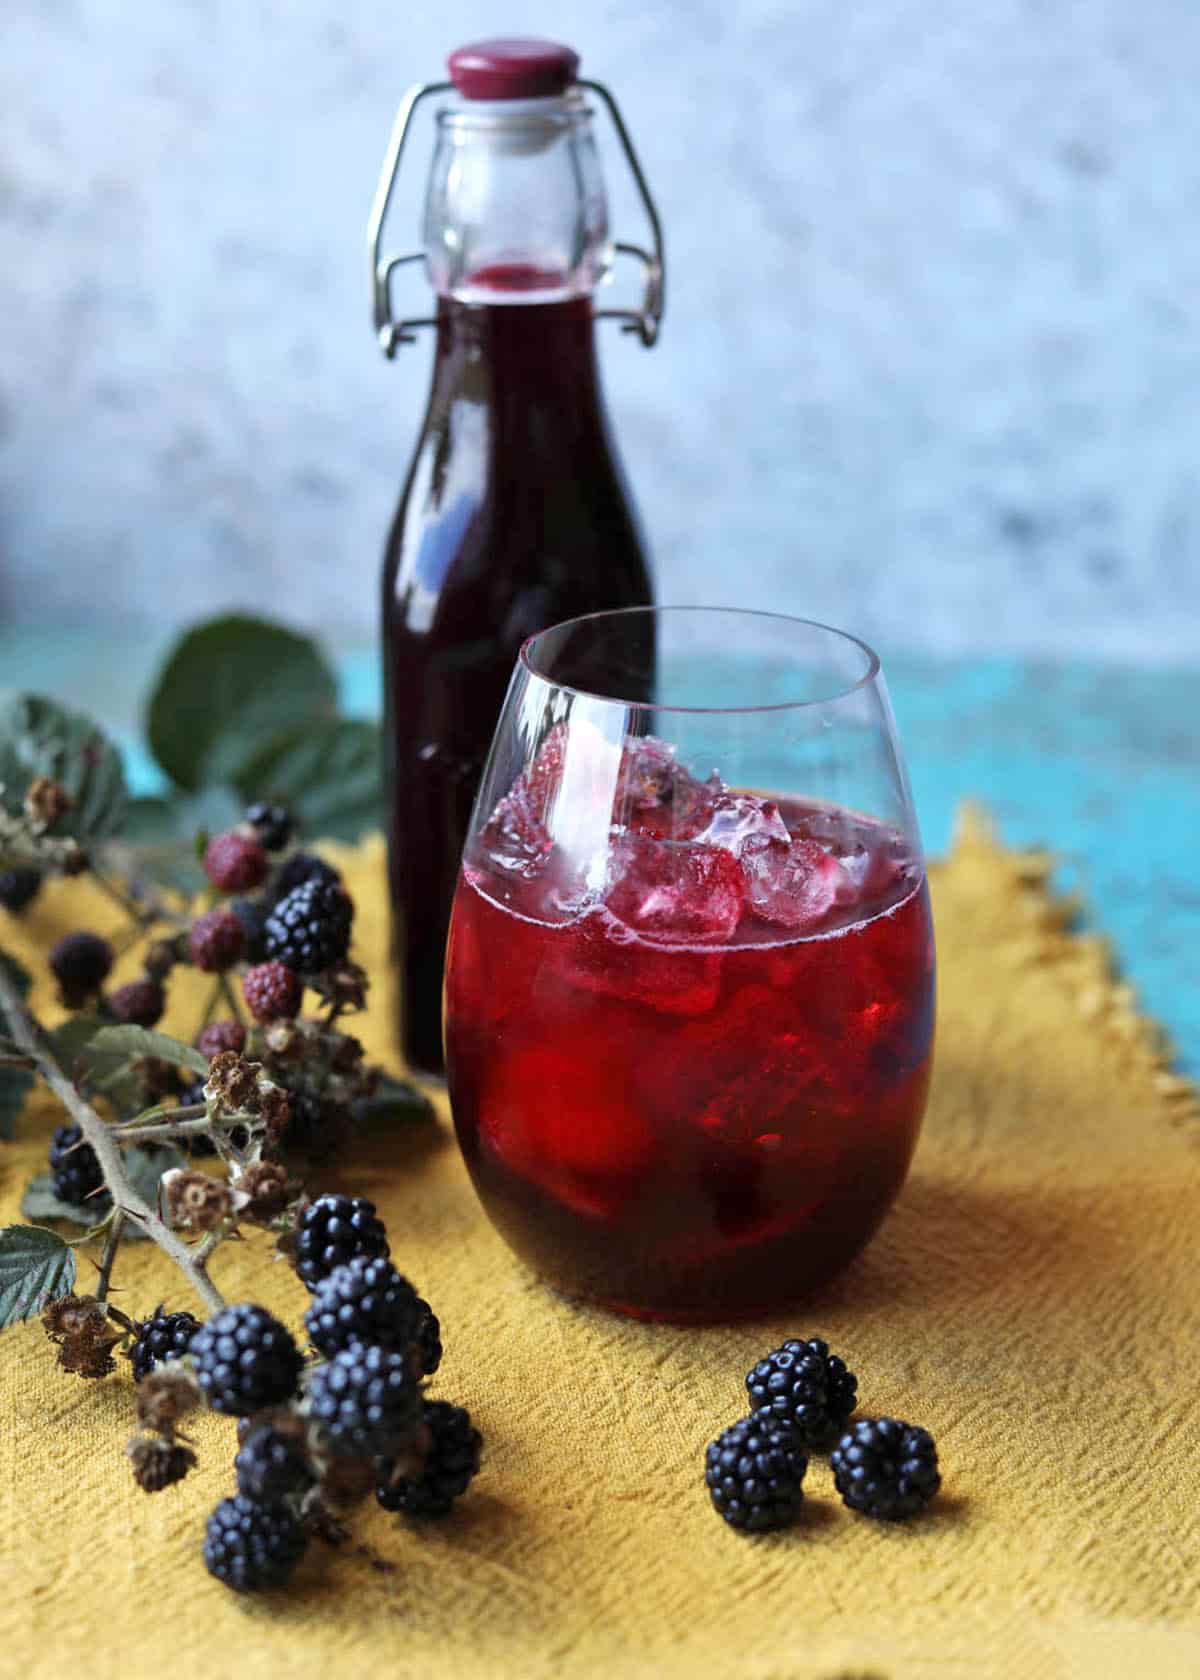 Blacberry and vanilla cordial, bottle, glass and blackberries